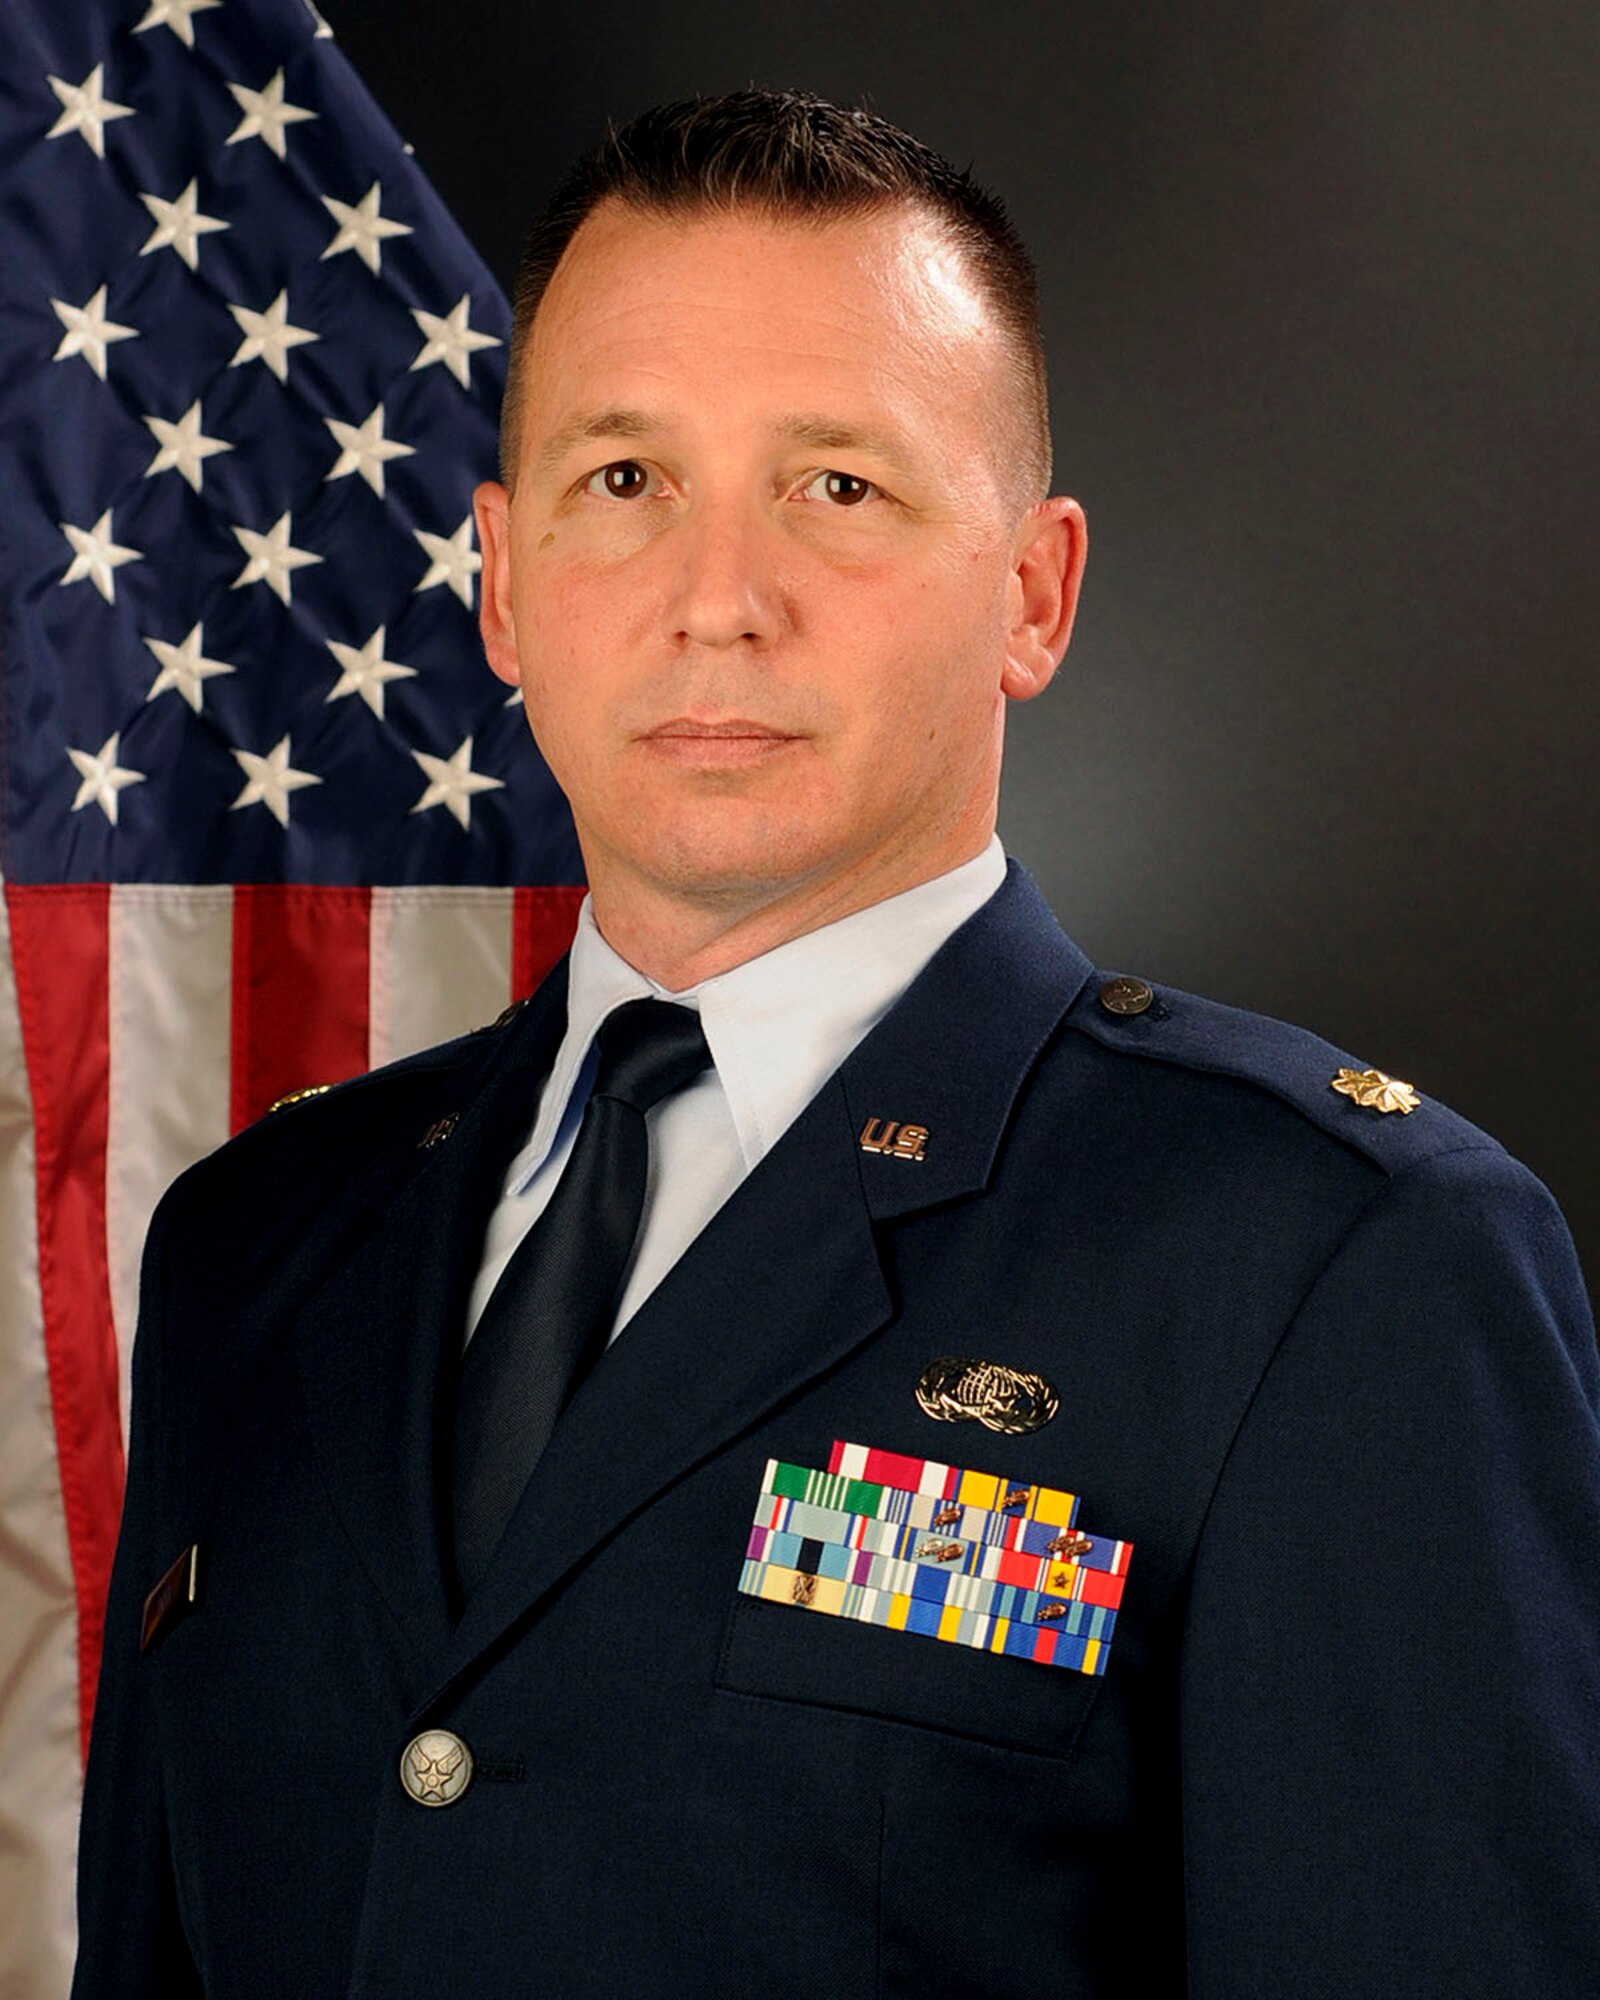 U.S. Air Force Maj. Jim Roth, 169th Force Support Squadron Commander, Oct. 29, 2014.   (U.S. Air National Guard photo by Tech. Sgt. Caycee Watson/Released)